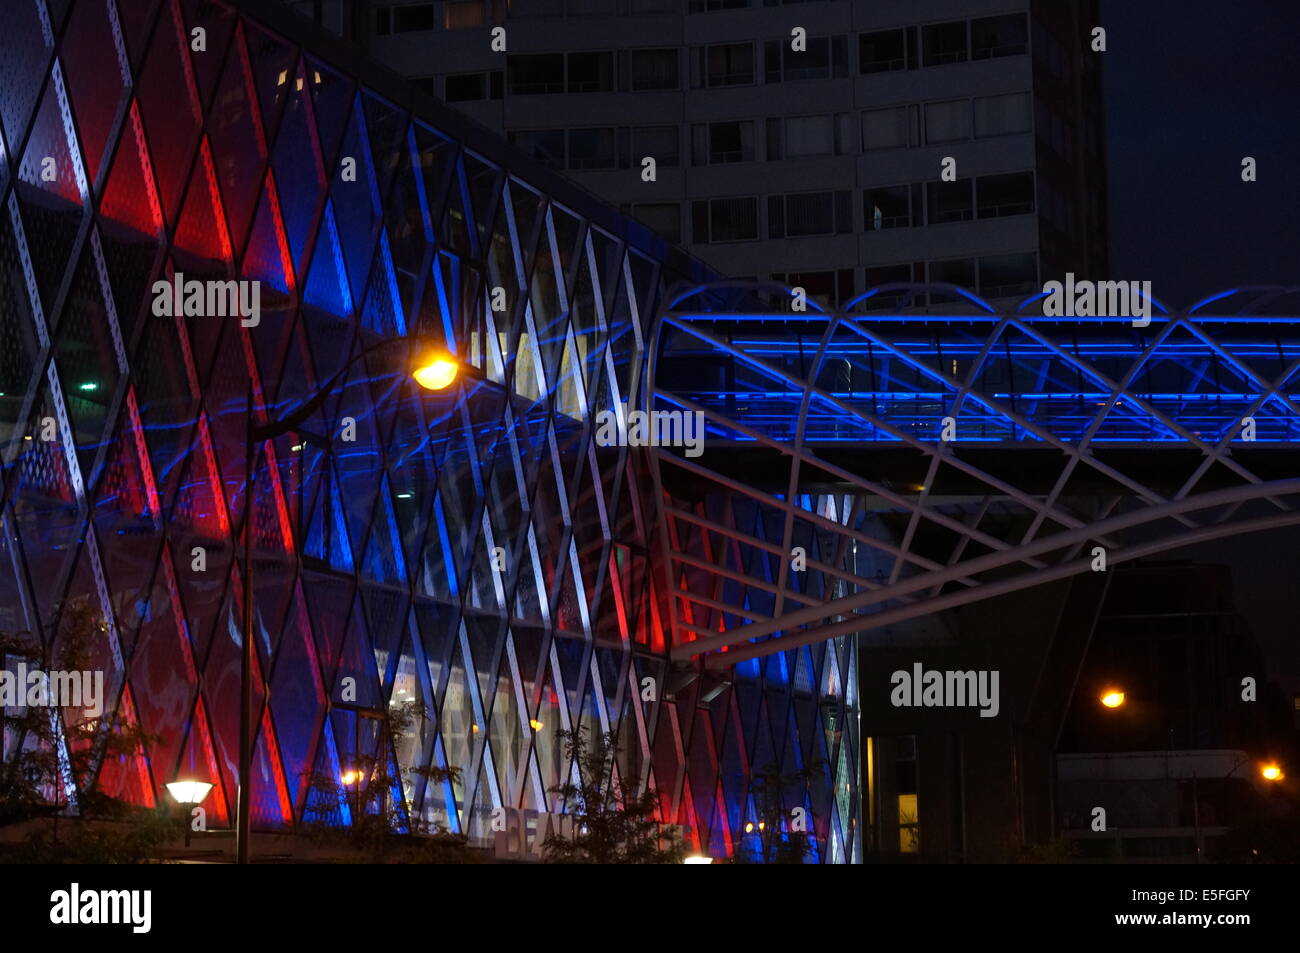 Colorful exterior design of Centre Commercial Beaugrenelle Paris by night Stock Photo